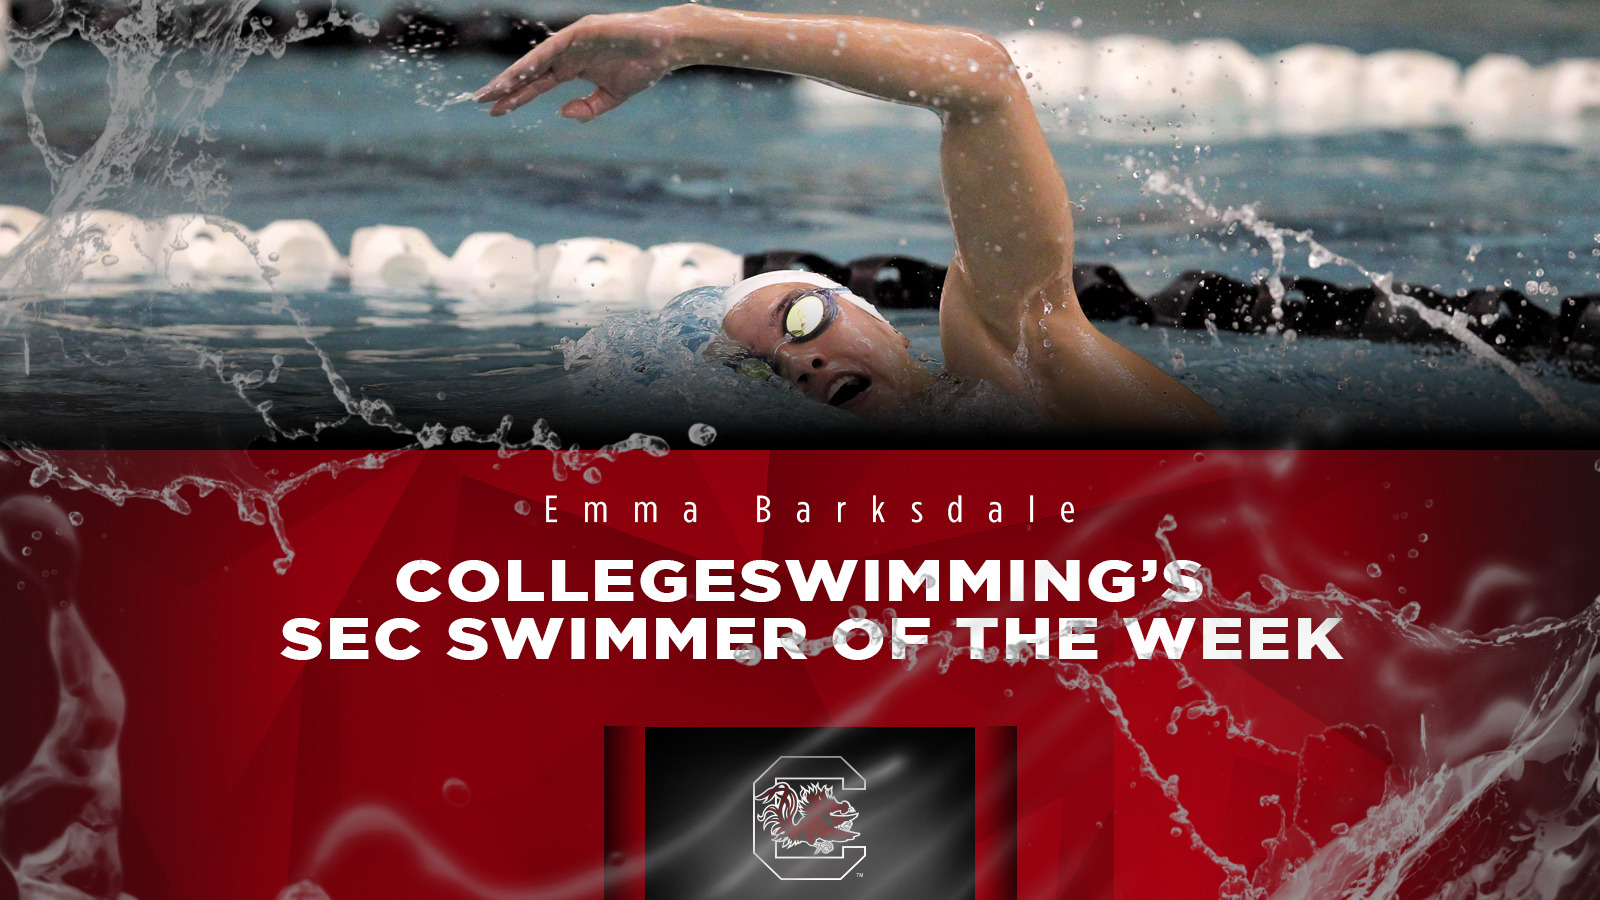 Emma Barksdale Named CollegeSwimming SEC Swimmer of the Week